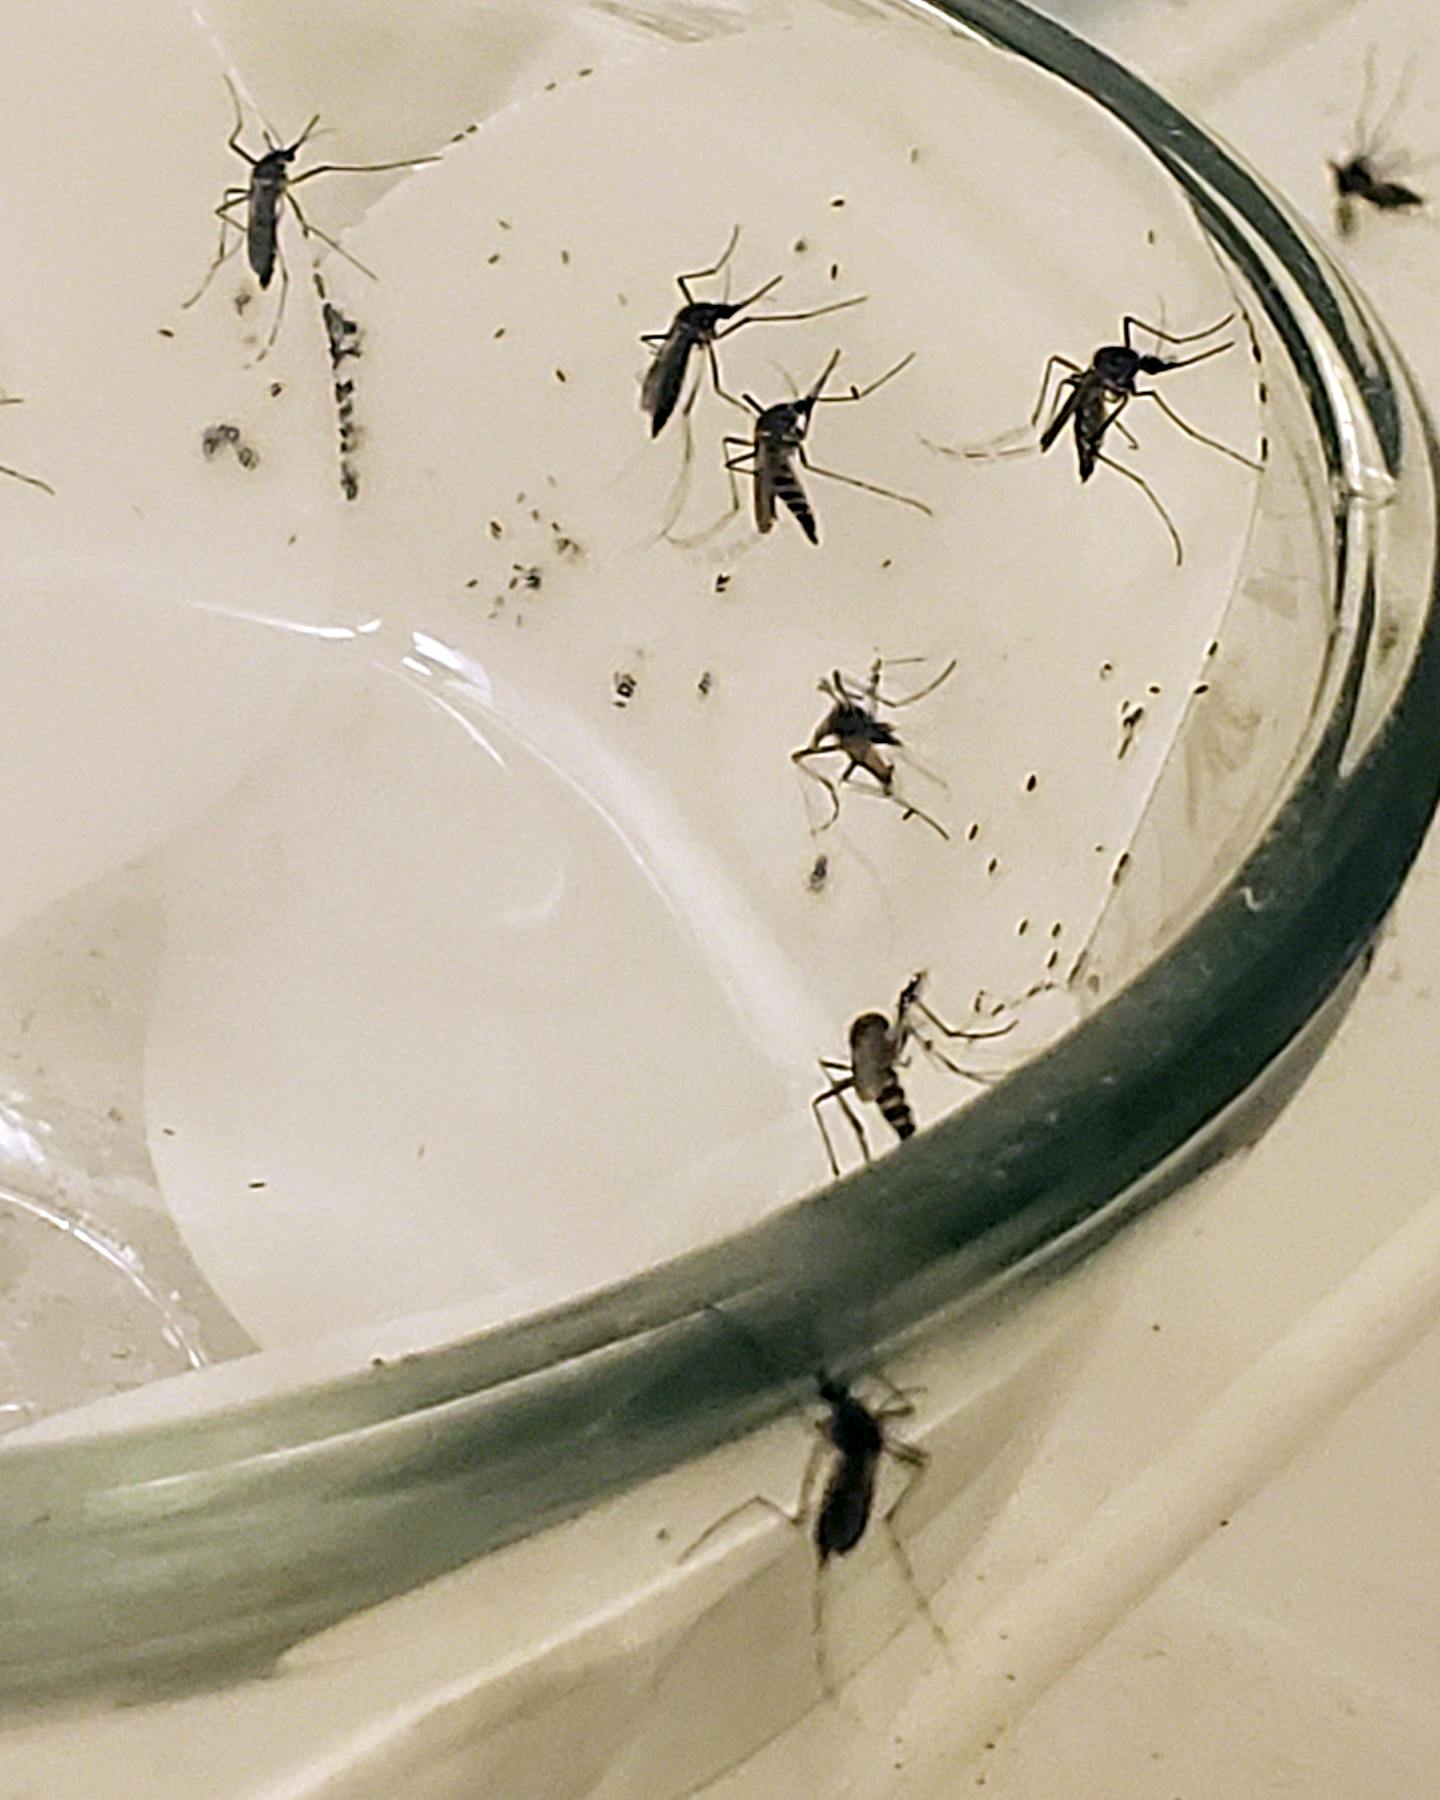 A half-dozen mosquitoes spread along the inside of a container.